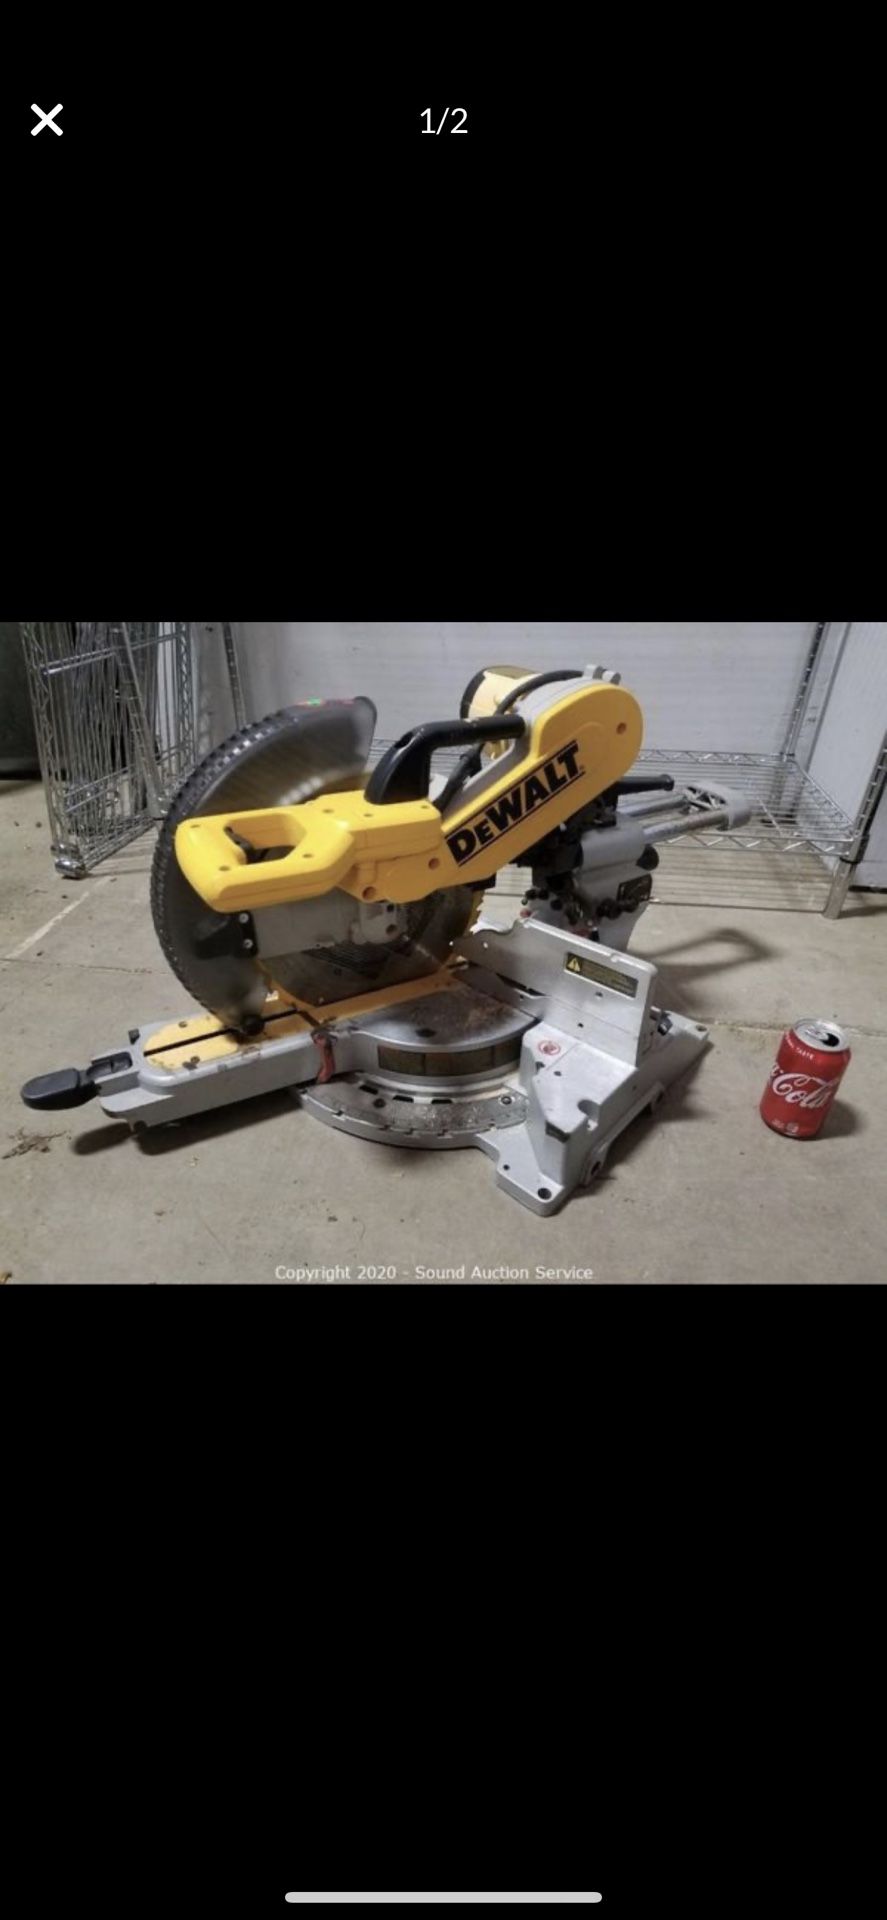 Excellent condition saw